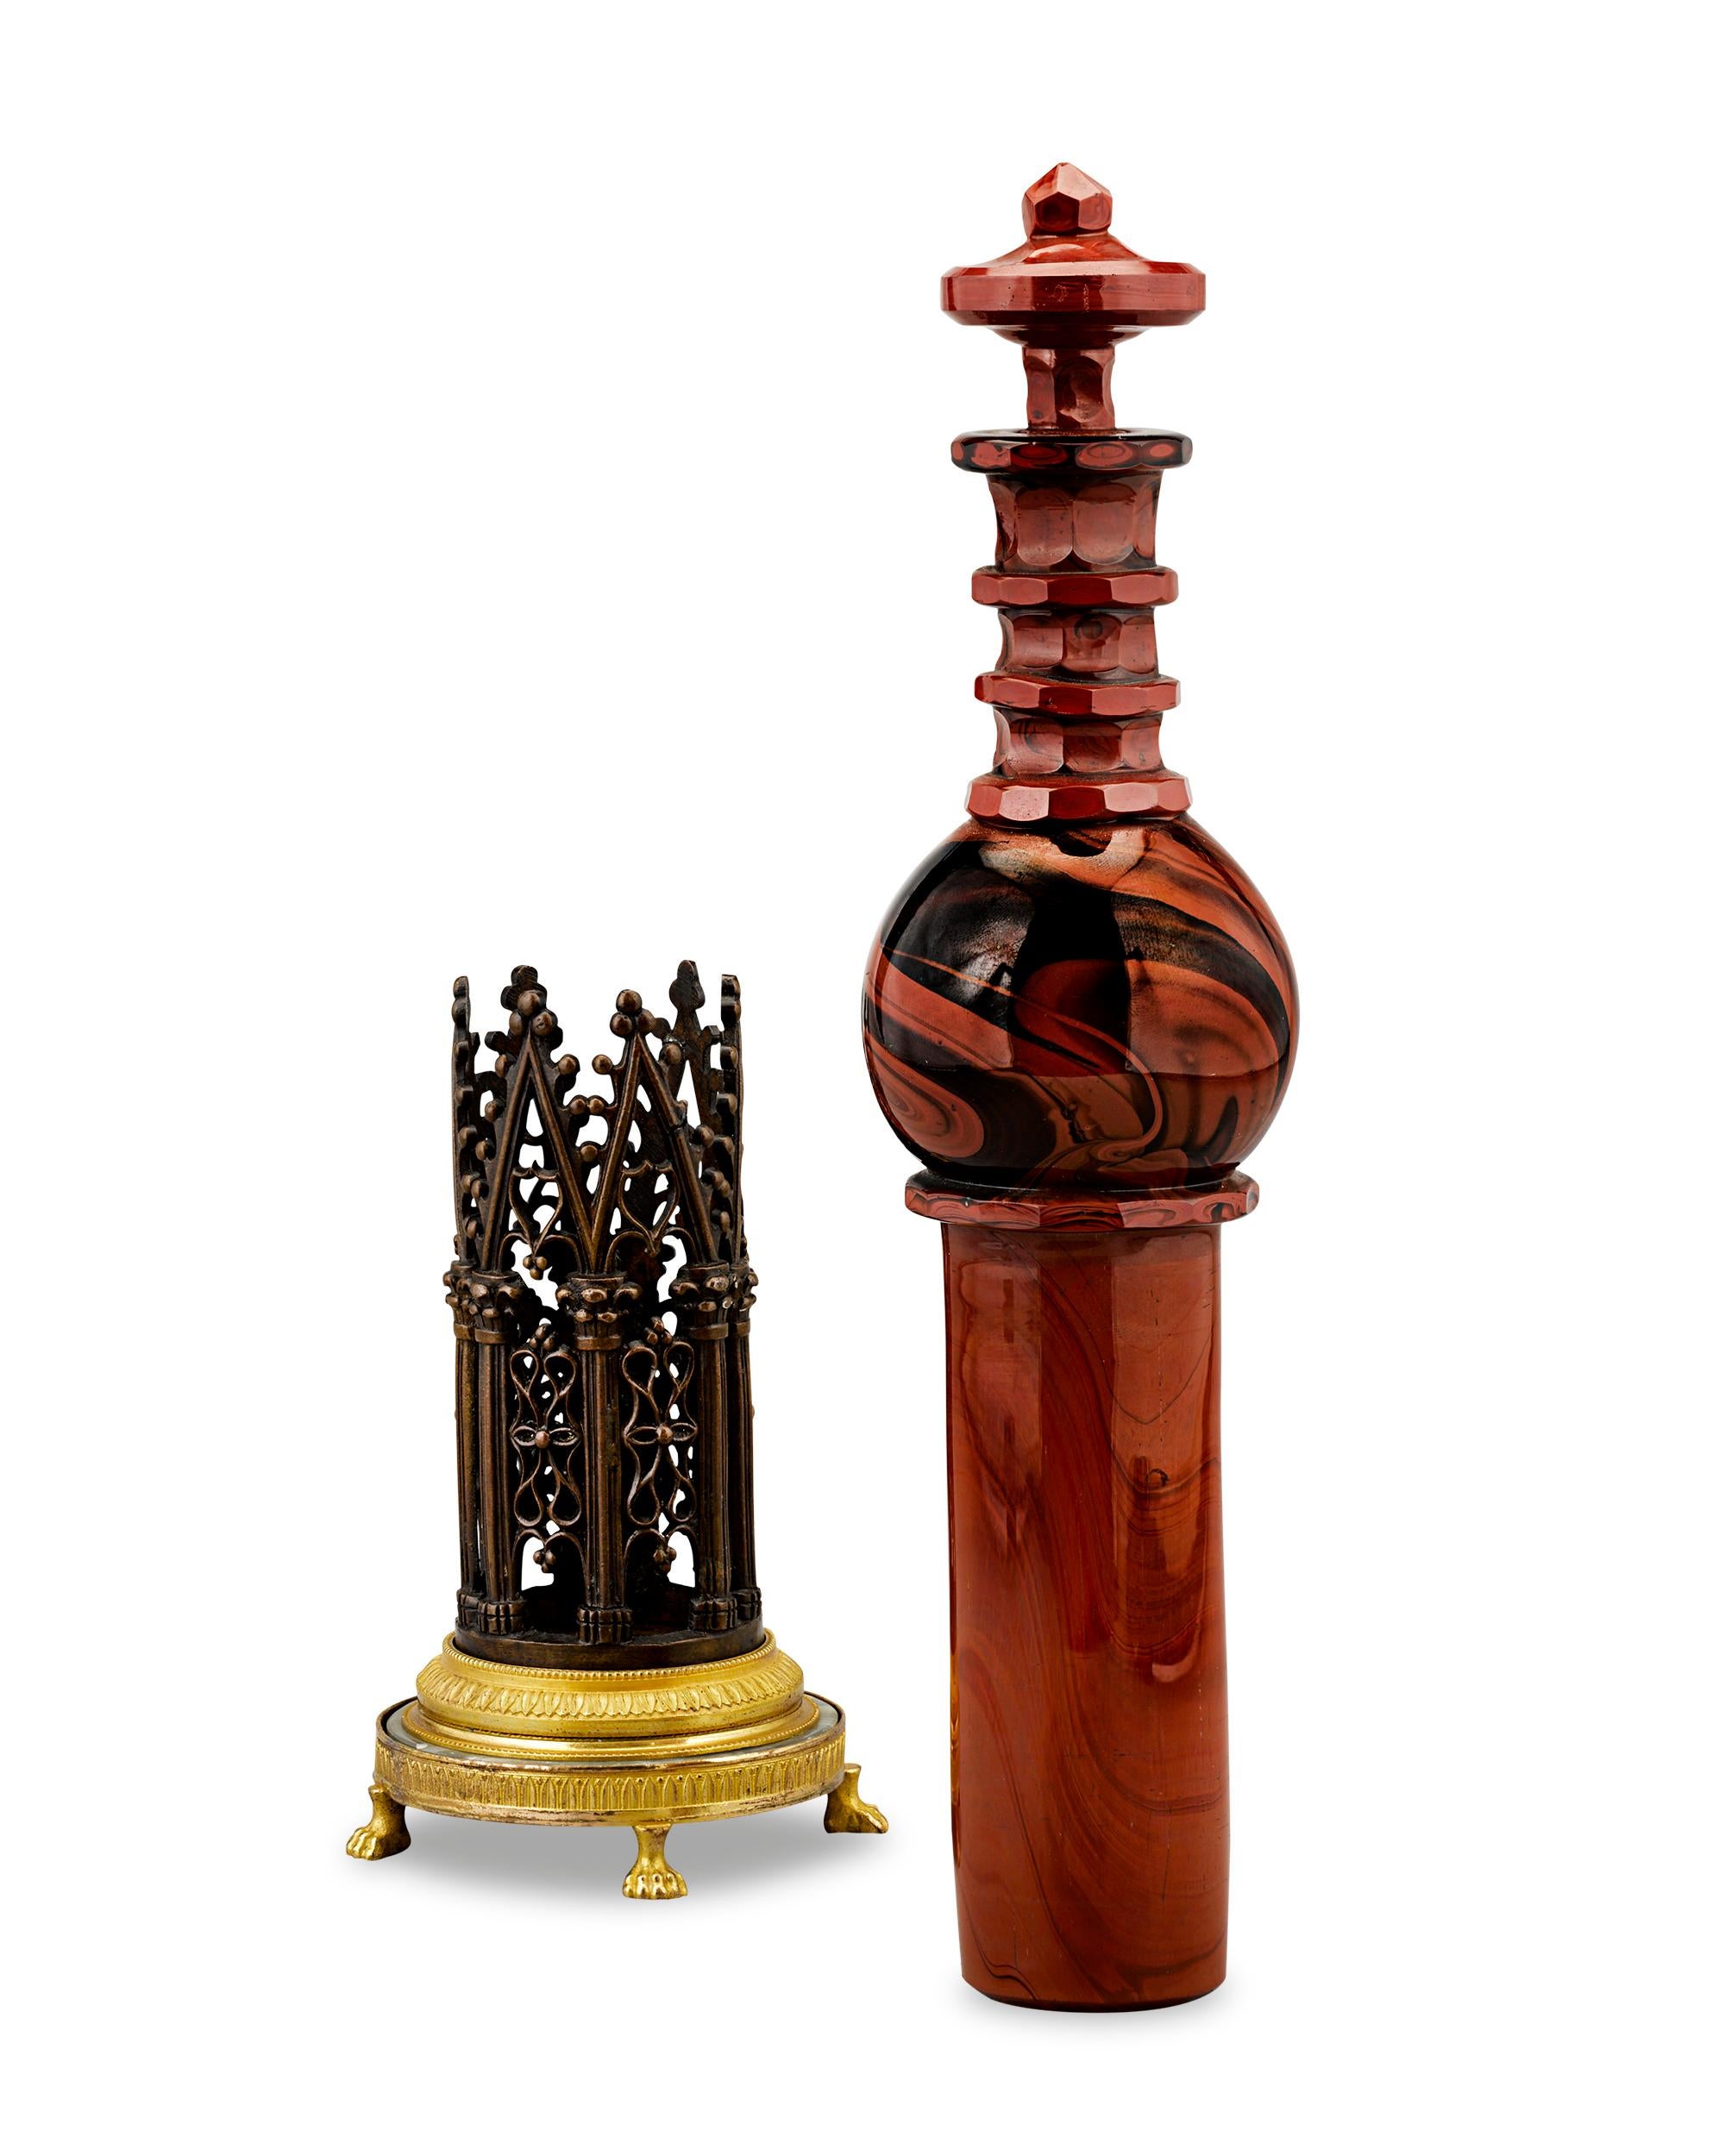 This fascinating Charles X-period “cathedral” flacon has the appearance of agate, but it is actually crafted of rare red hyalite glass. The sculpted vessel rests within a patinated and gilt bronze basilica-inspired stand decorated in an openwork,